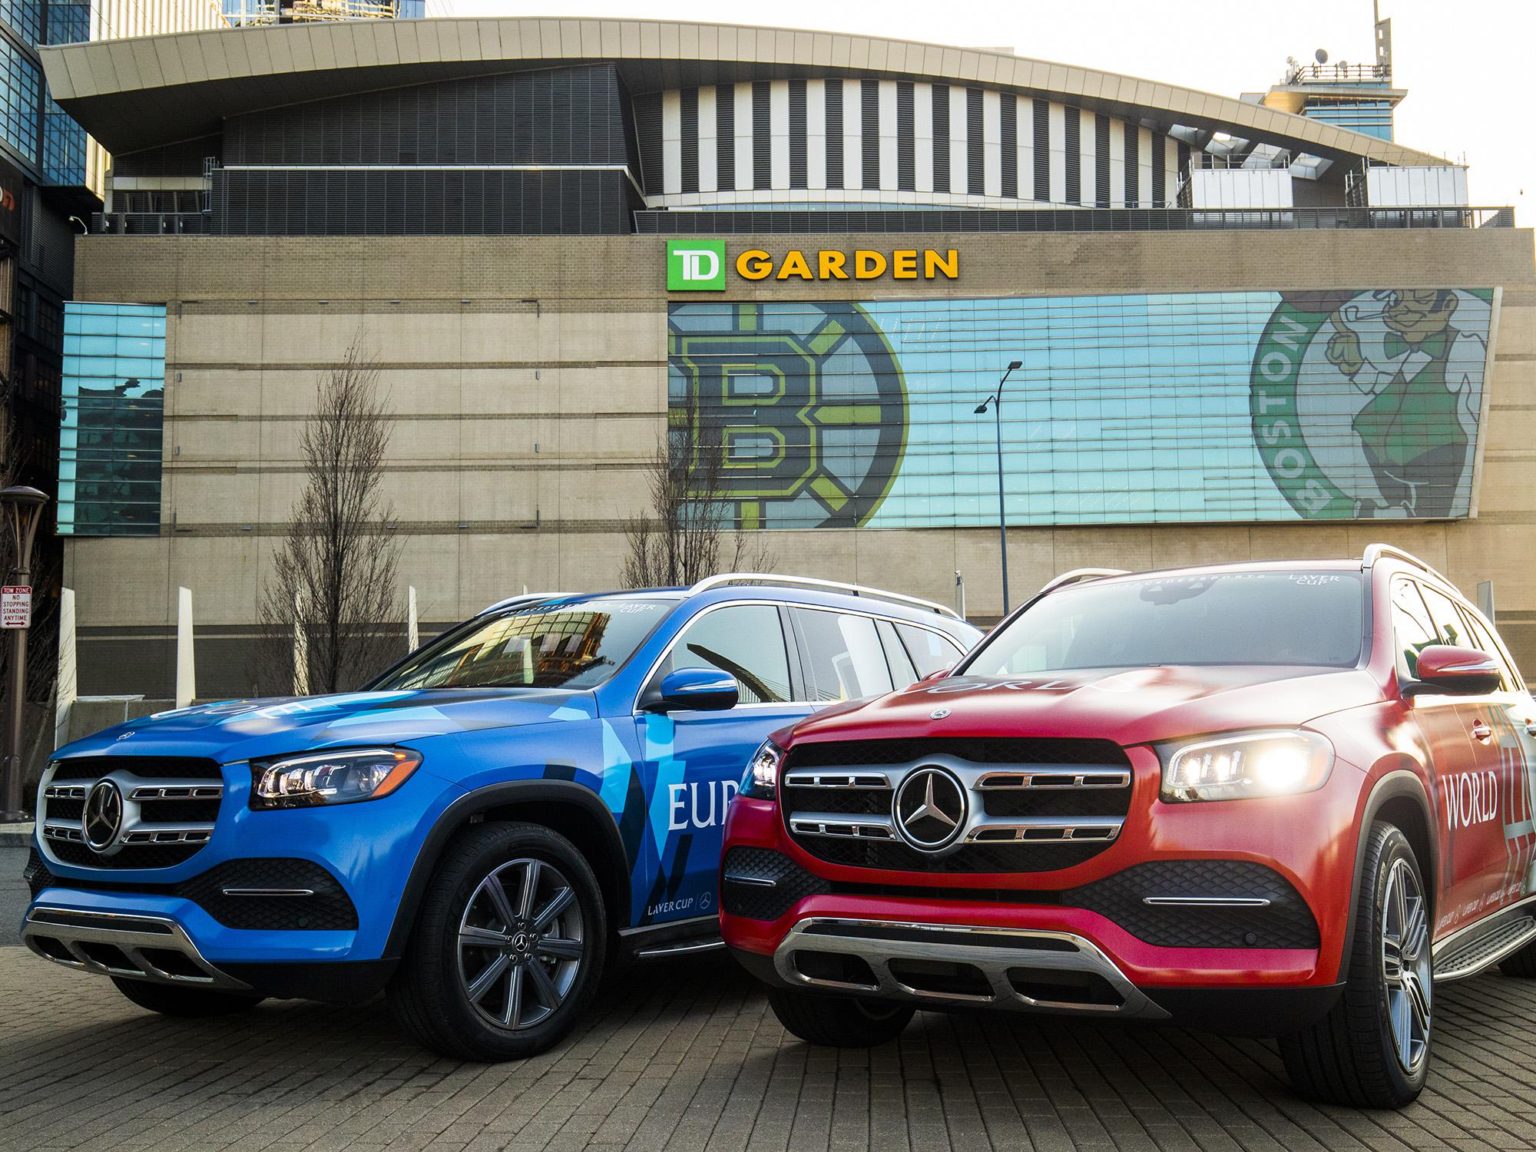 A general view of the Mercedes Laver Cup cars in front of TD Garden in promotion of Laver Cup Boston 2020 on March 2, 2020 in Boston, Massachusetts.